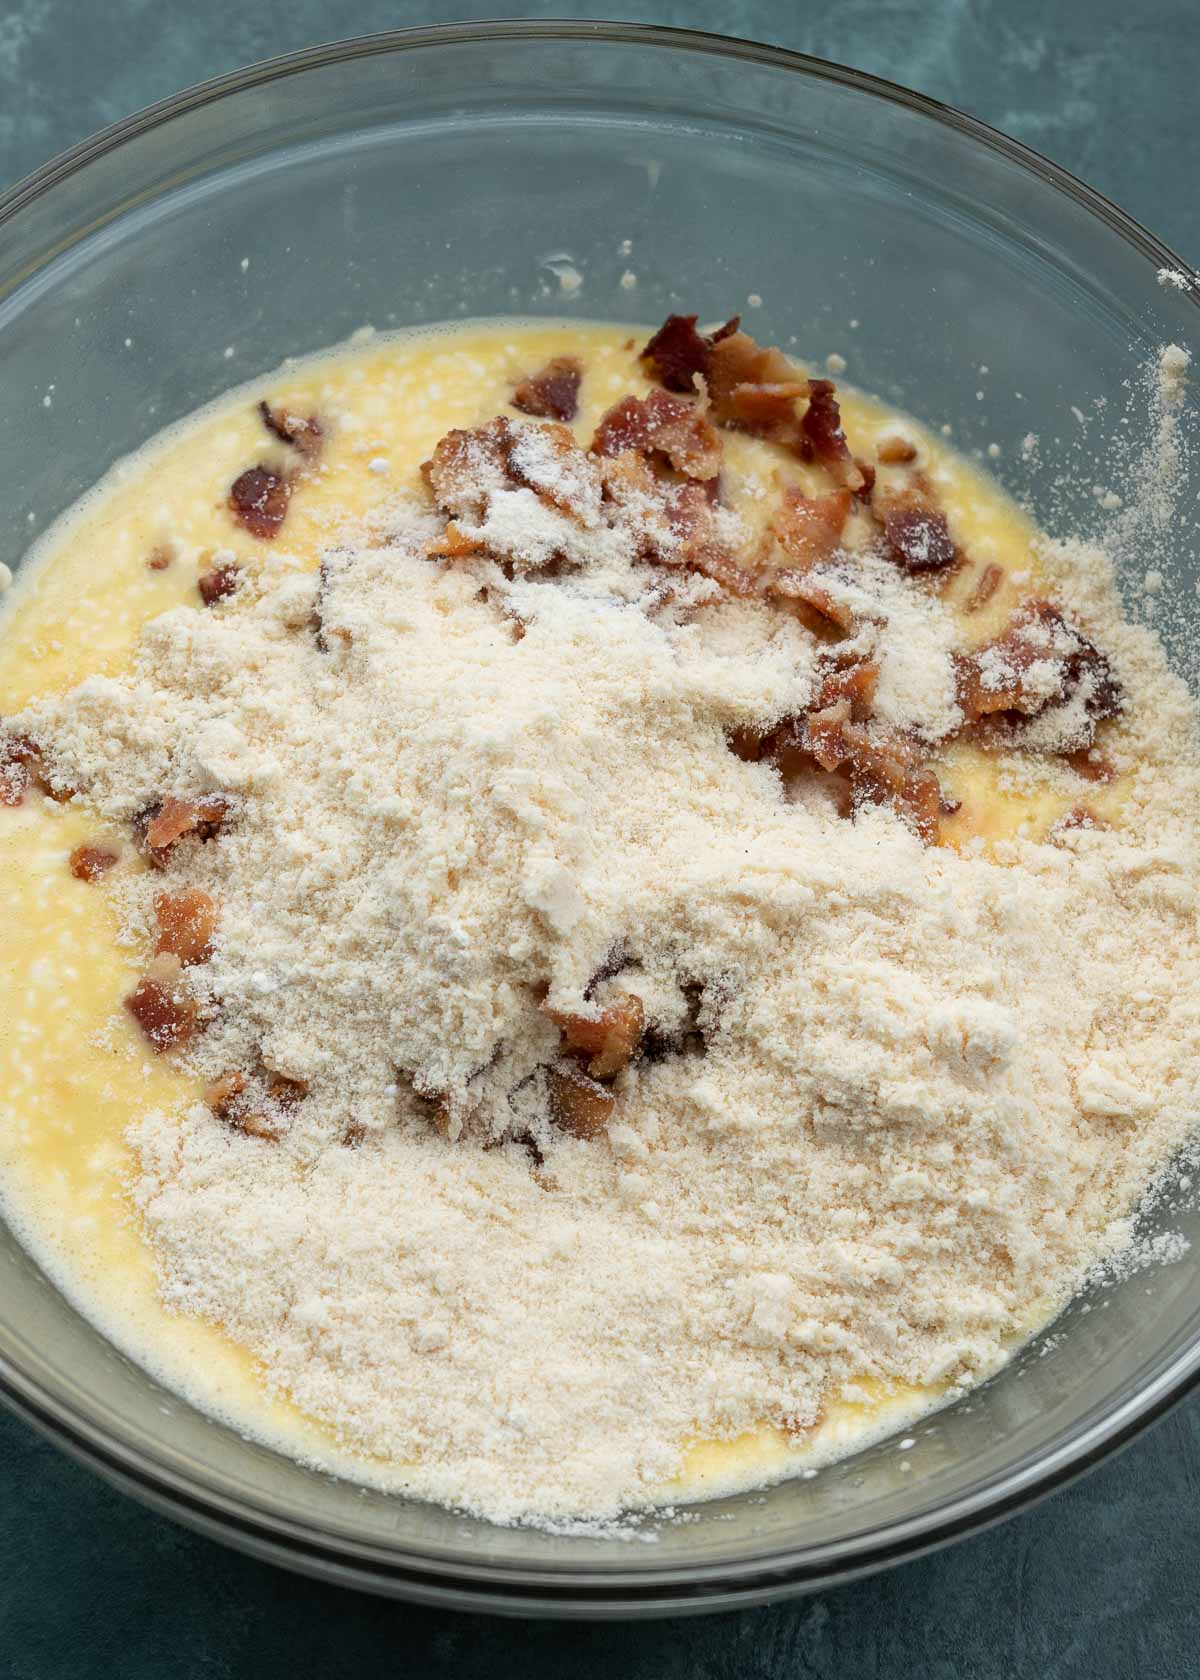 eggs, cream cheese, shredded cheese, bacon, flour, and baking powder in a glass bowl